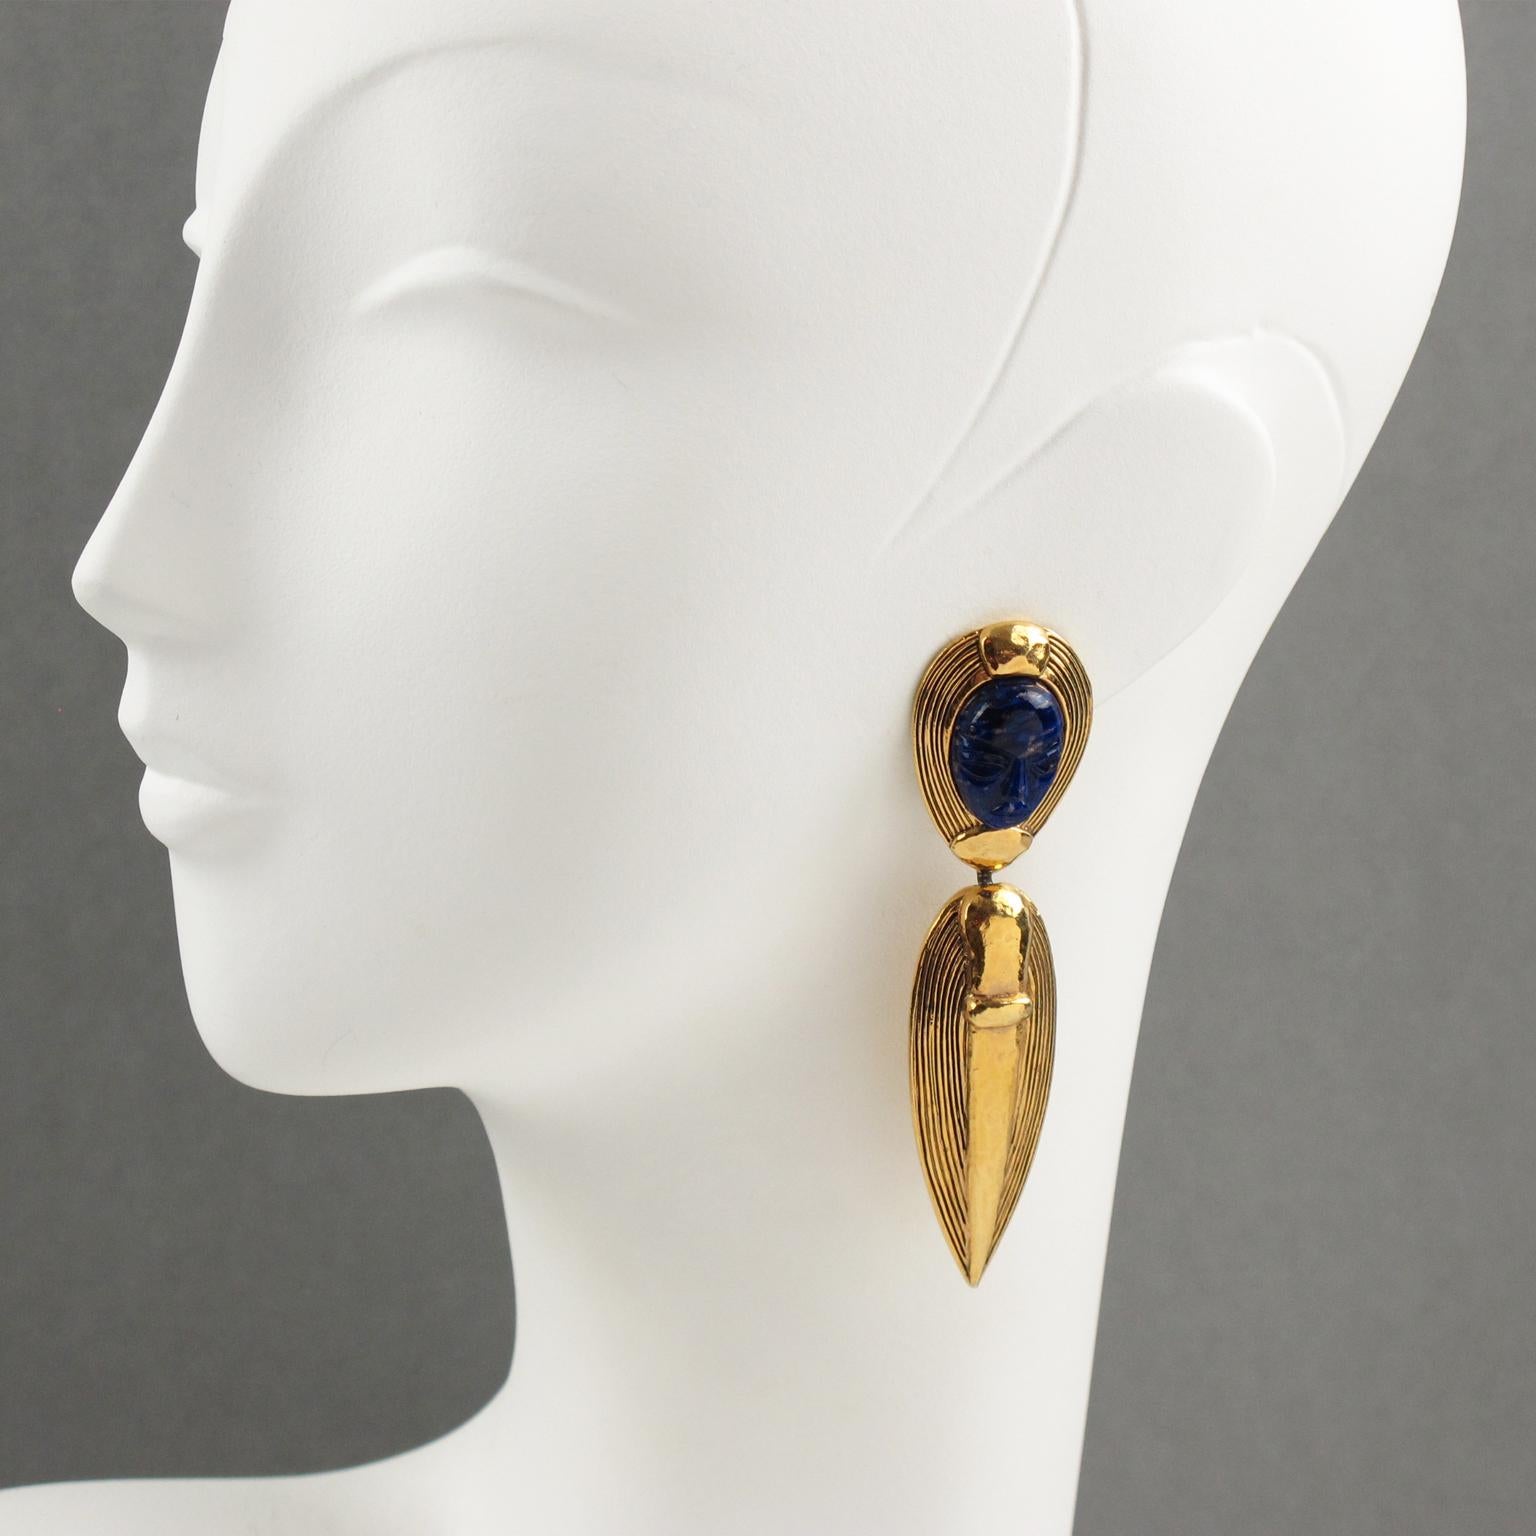 Elegant Guy Laroche Paris signed clip-on earrings. Dangling shape featuring sort of South American inspired design, mostly Pre-Colombian with carved and textured gilt metal, ornate with Lapis Lazuli glass cabochon with face carving. Engraved